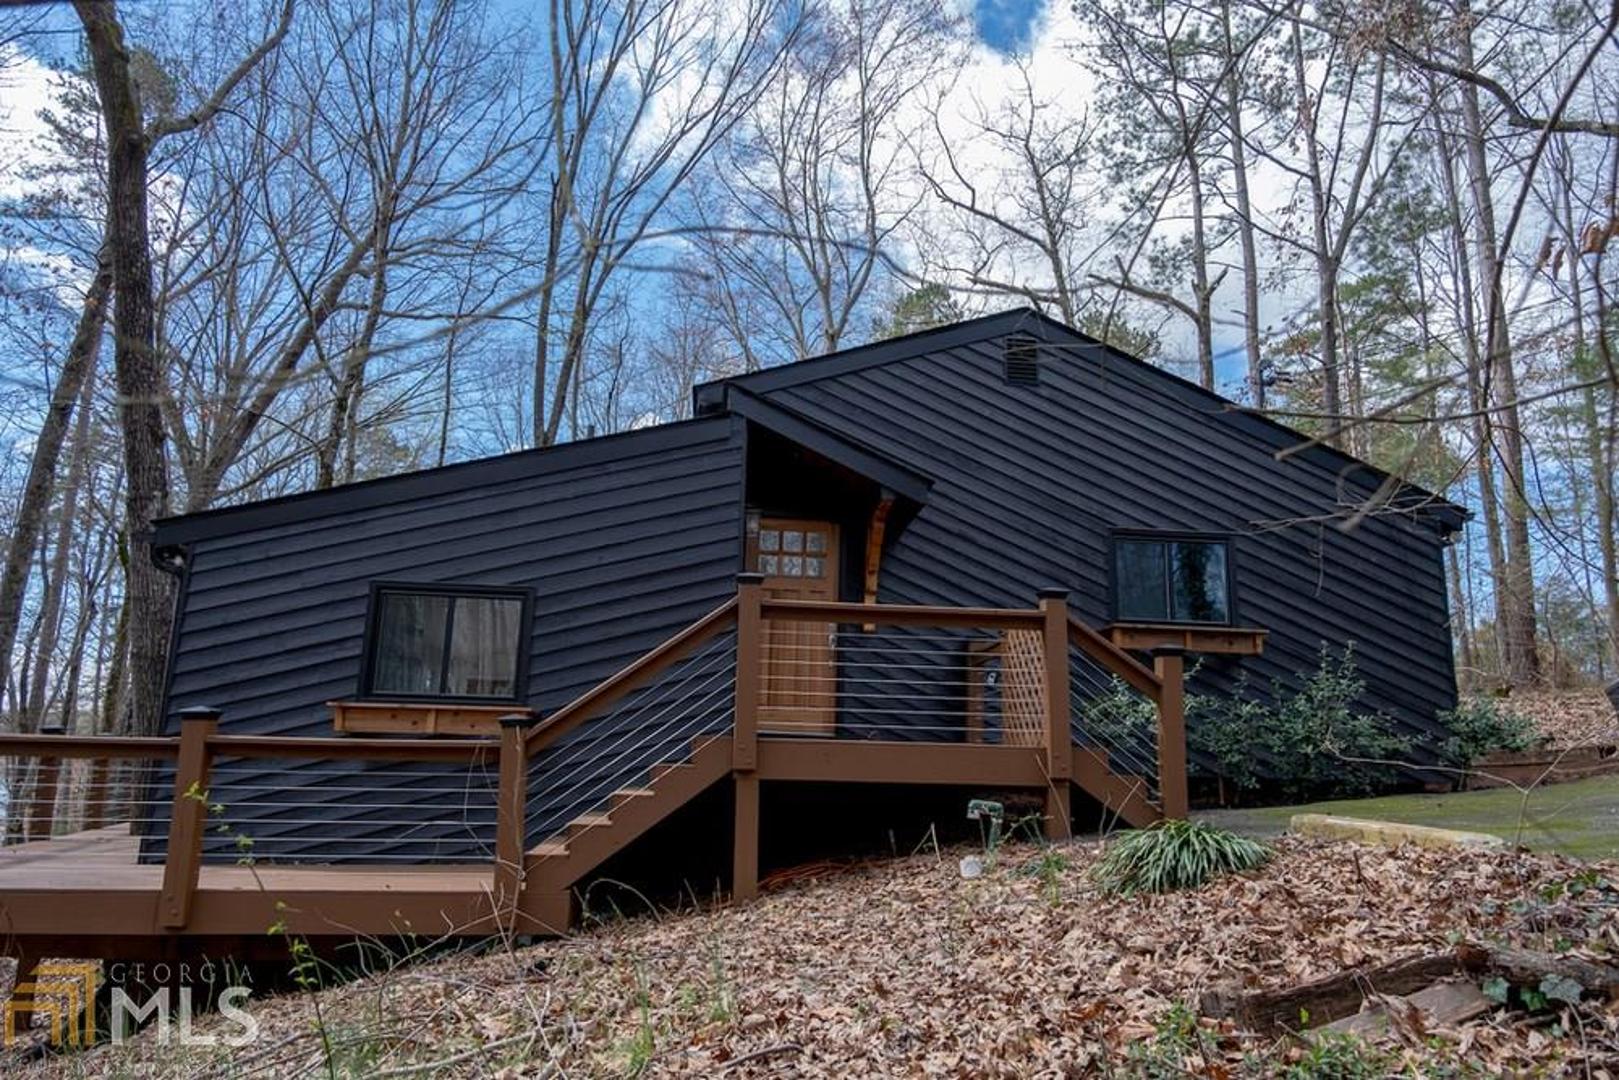 Adorable modern cottage located on Lake Lanier in Dawsonville